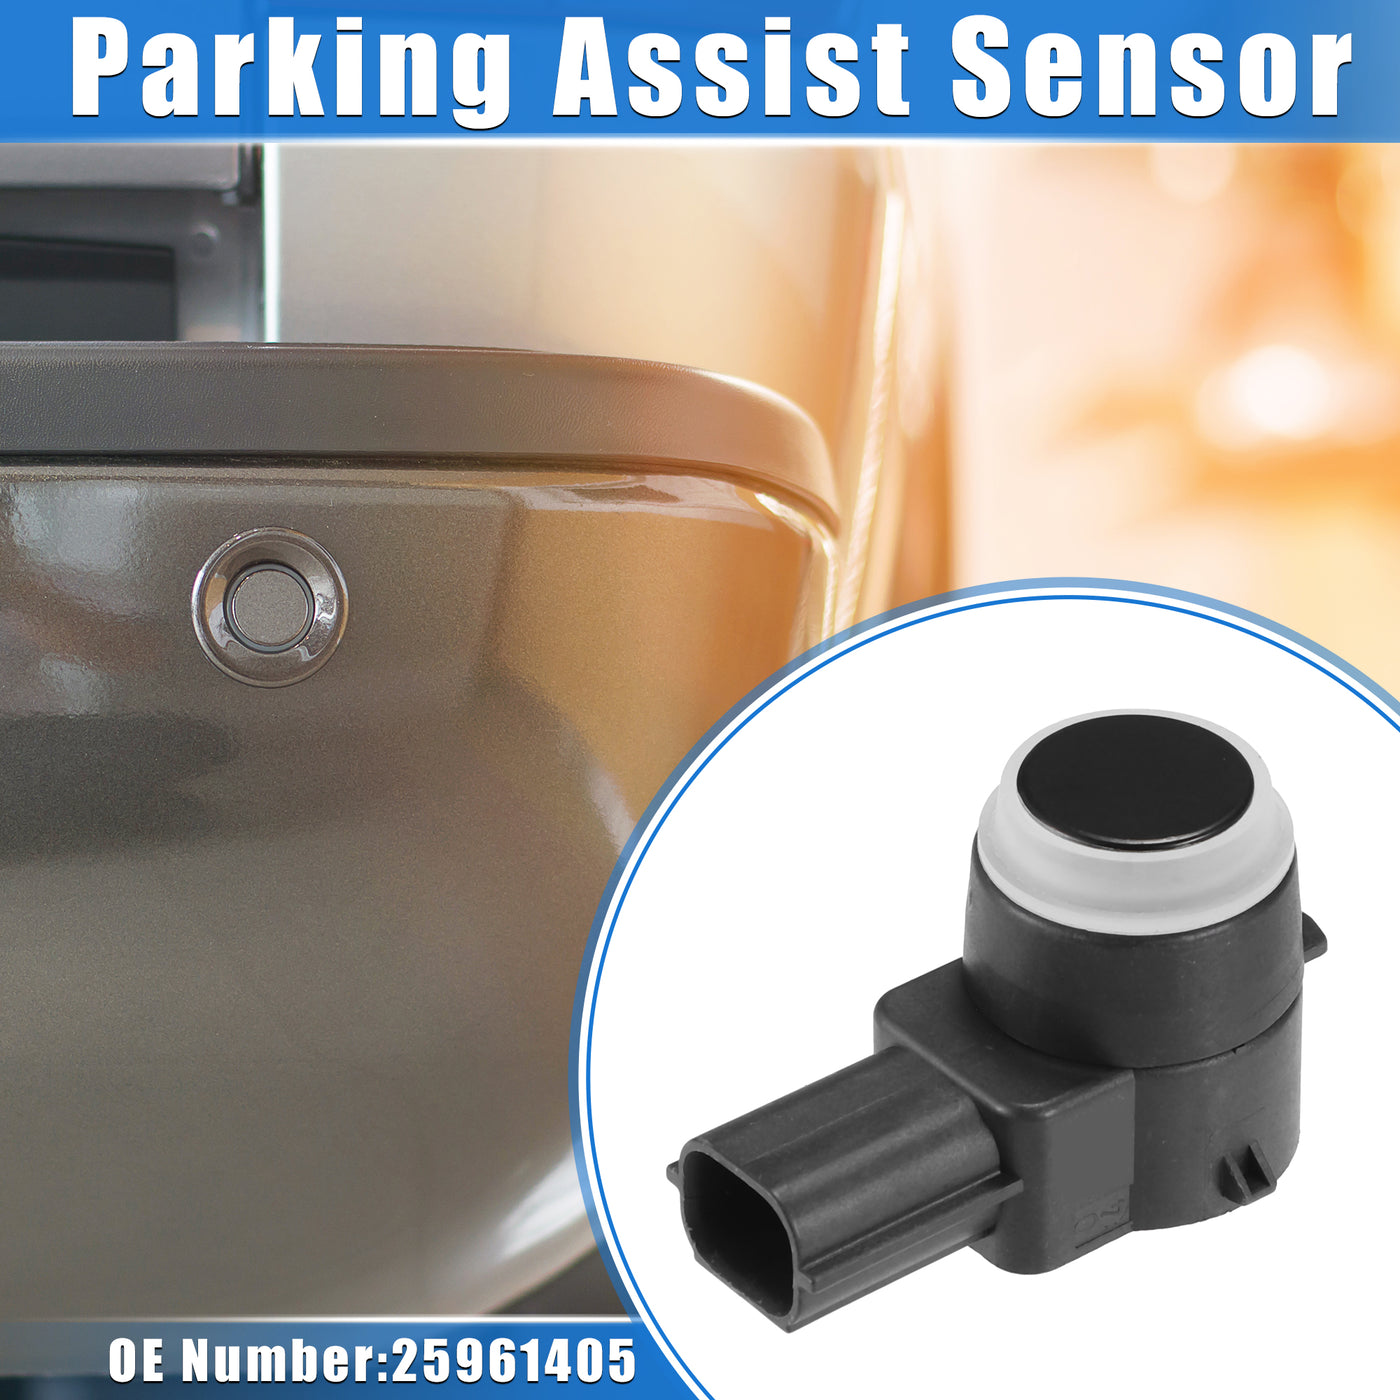 VekAuto PDC Reverse Parking Assist Sensor Compatible for Cadillac Escalade 2007-2014, Durable ABS Plastic Black Rear Bumper Parking Assist Sensor